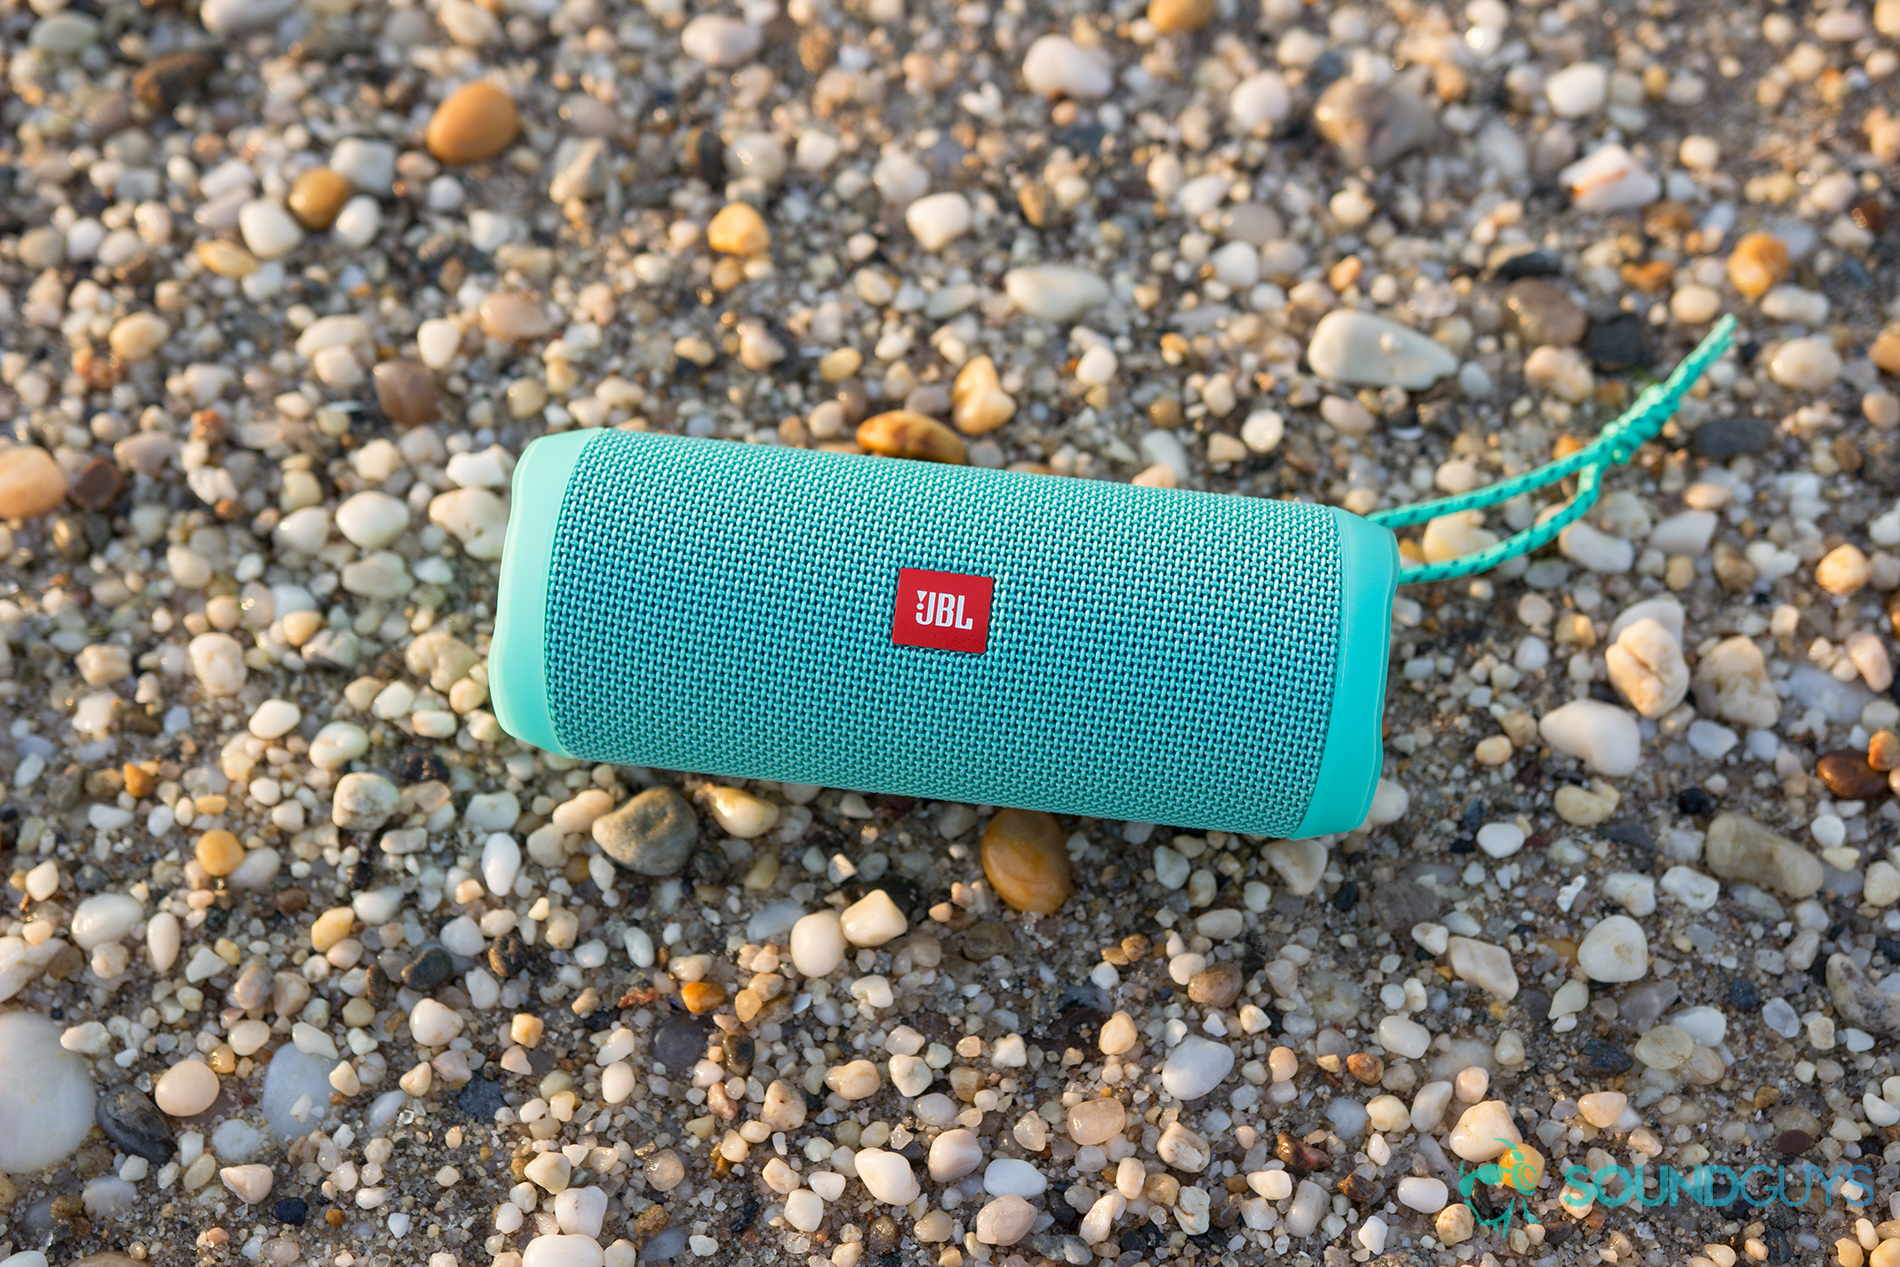 The JBL Flip 4 in teal on a wet pebbled background.